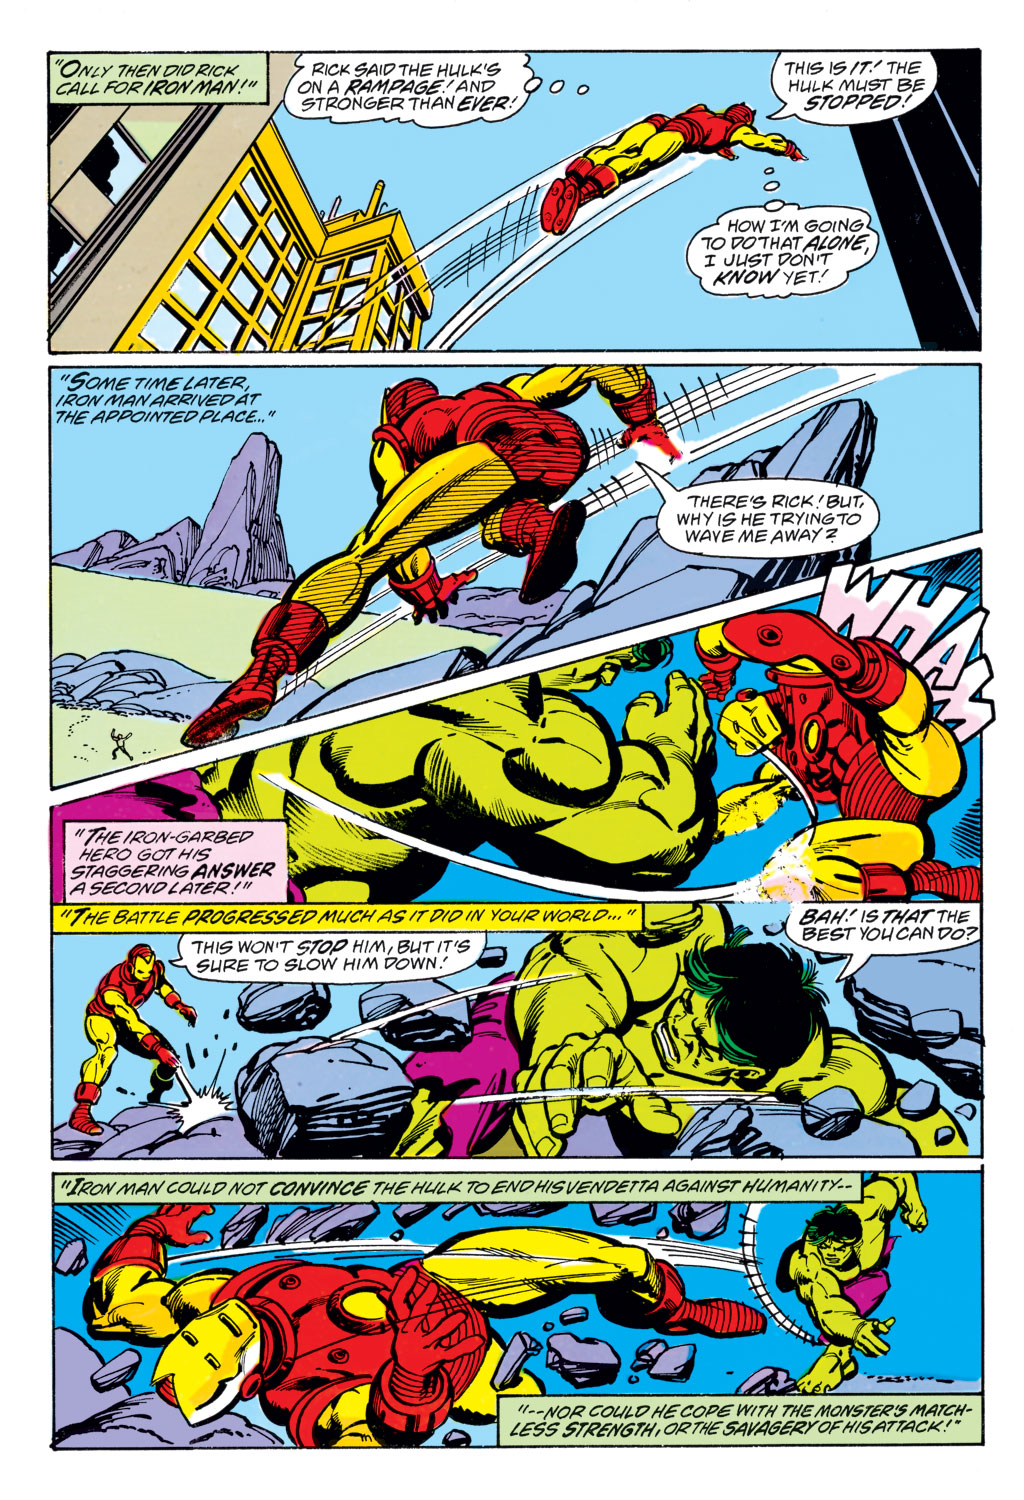 What If? (1977) issue 3 - The Avengers had never been - Page 8